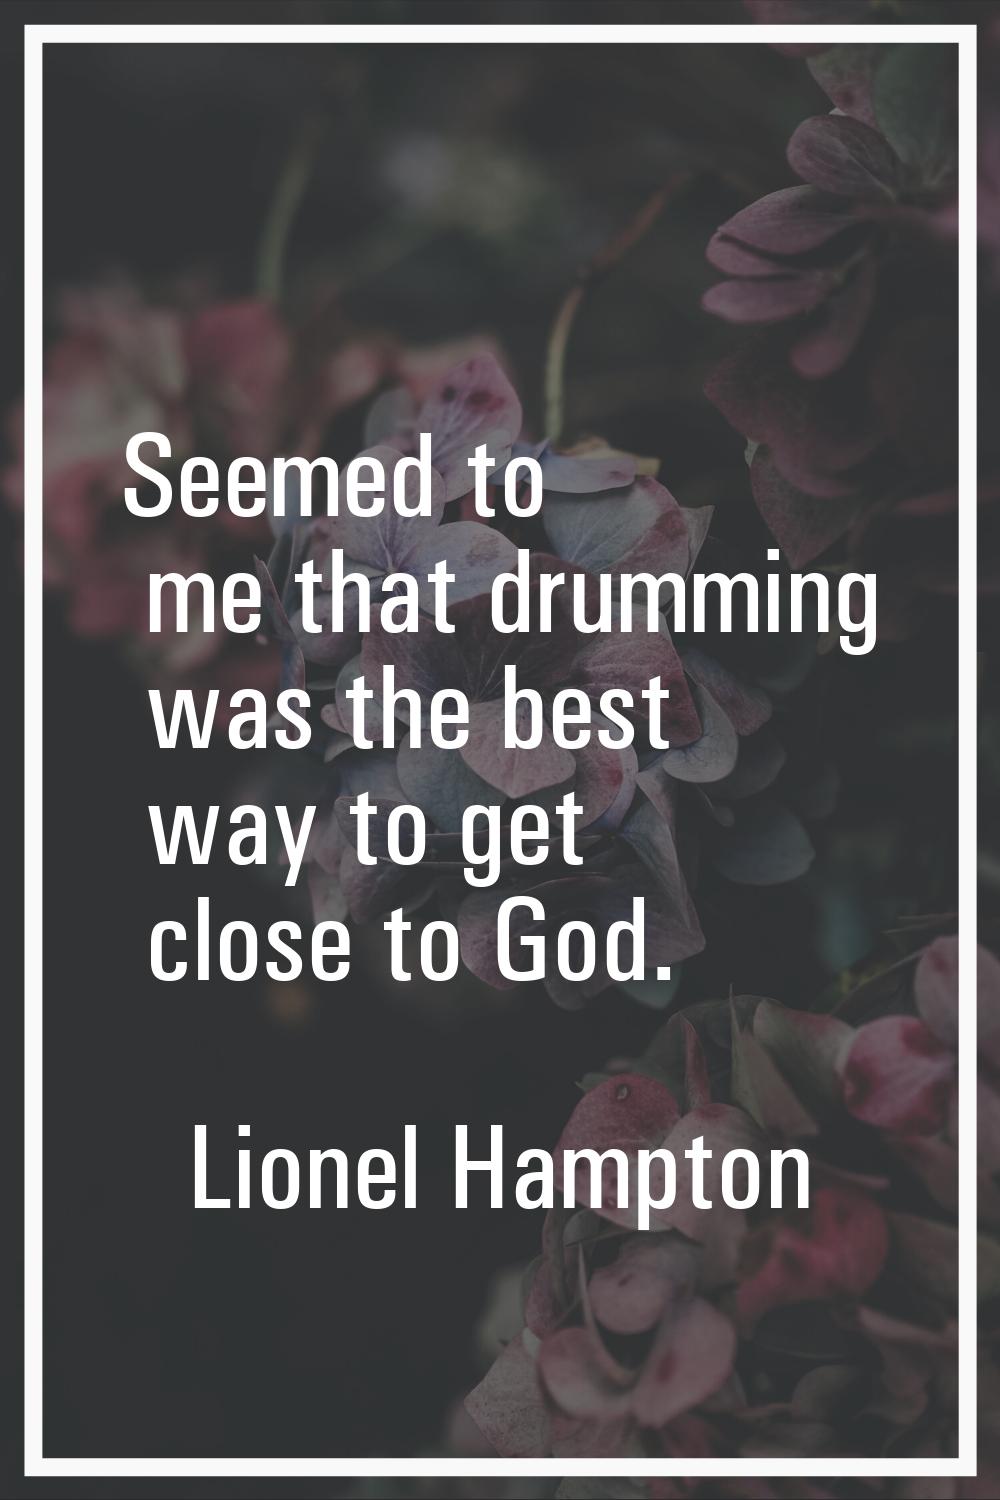 Seemed to me that drumming was the best way to get close to God.